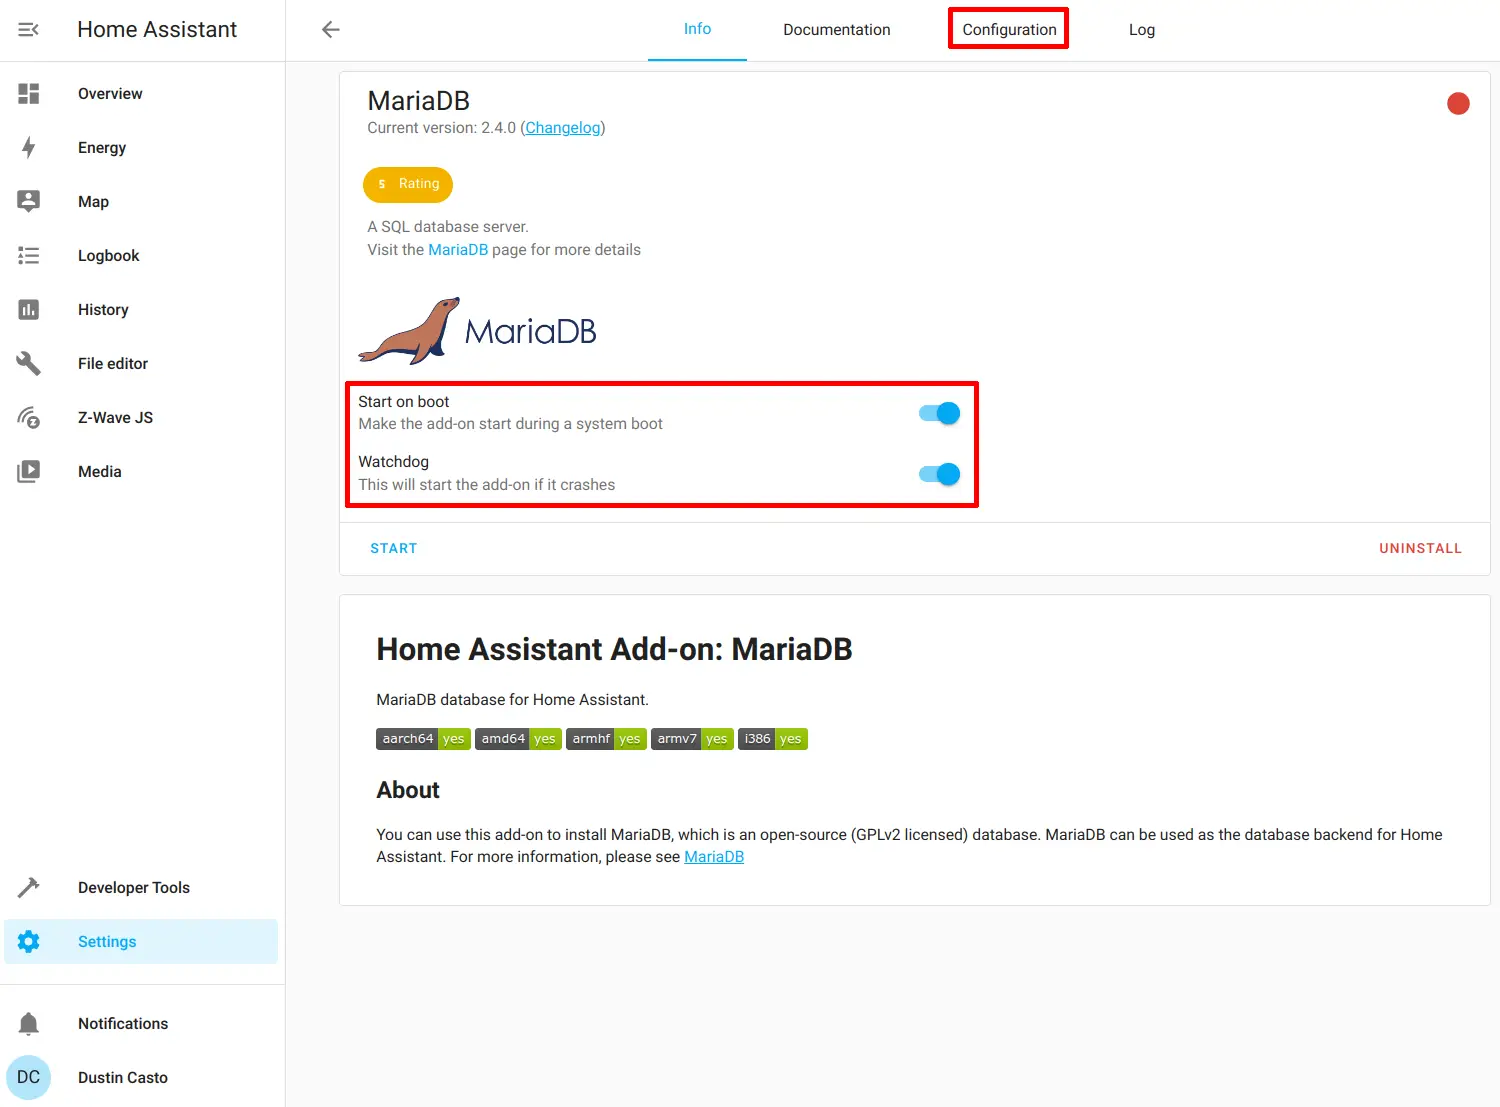 Home Assistant Install MariaDB